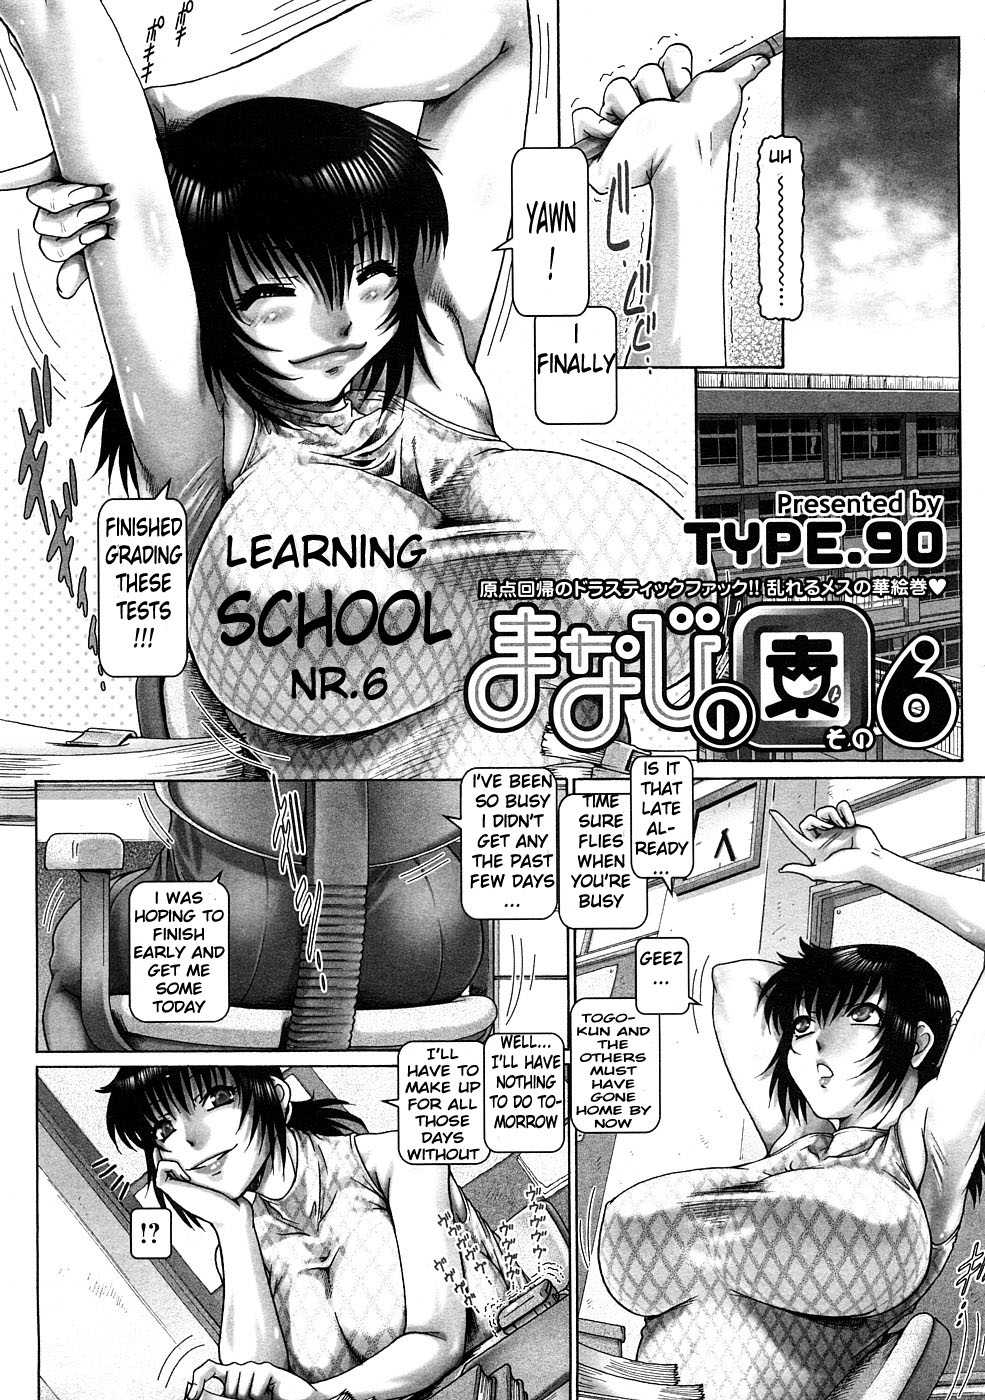 [TYPE.90] Learning School (Manabi no En) - Ch.1 and 6 (English) [TYPE.90] まなびの園その1 &amp; その6 [英訳]